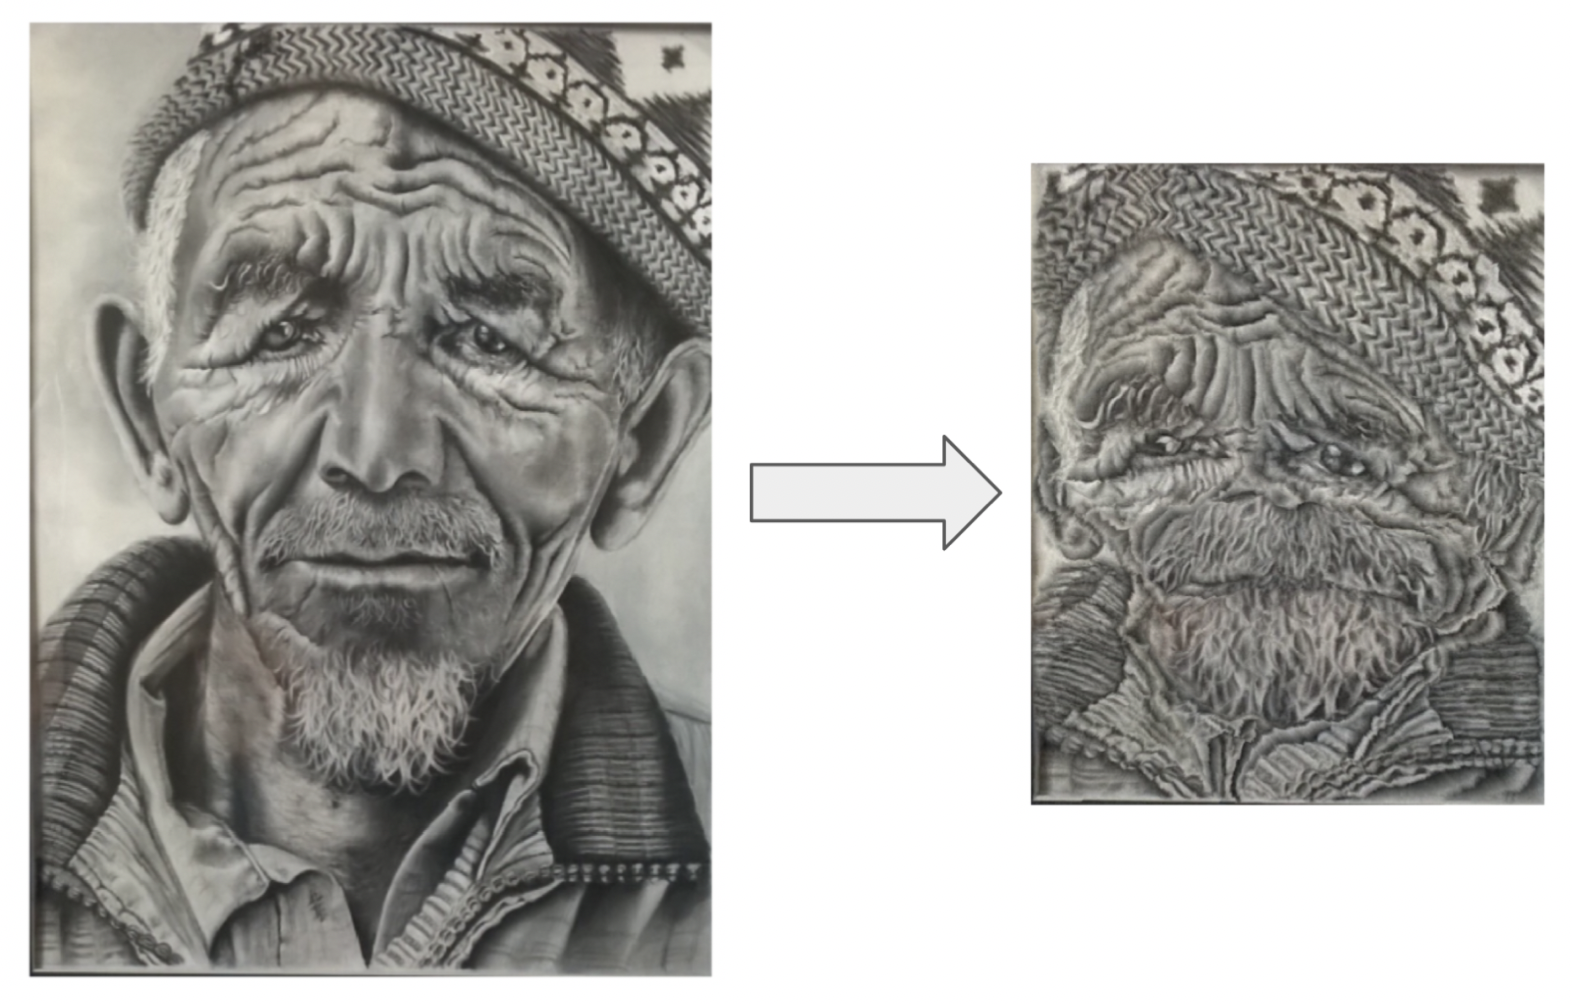 Drawing of old man's face mangled by seam carving